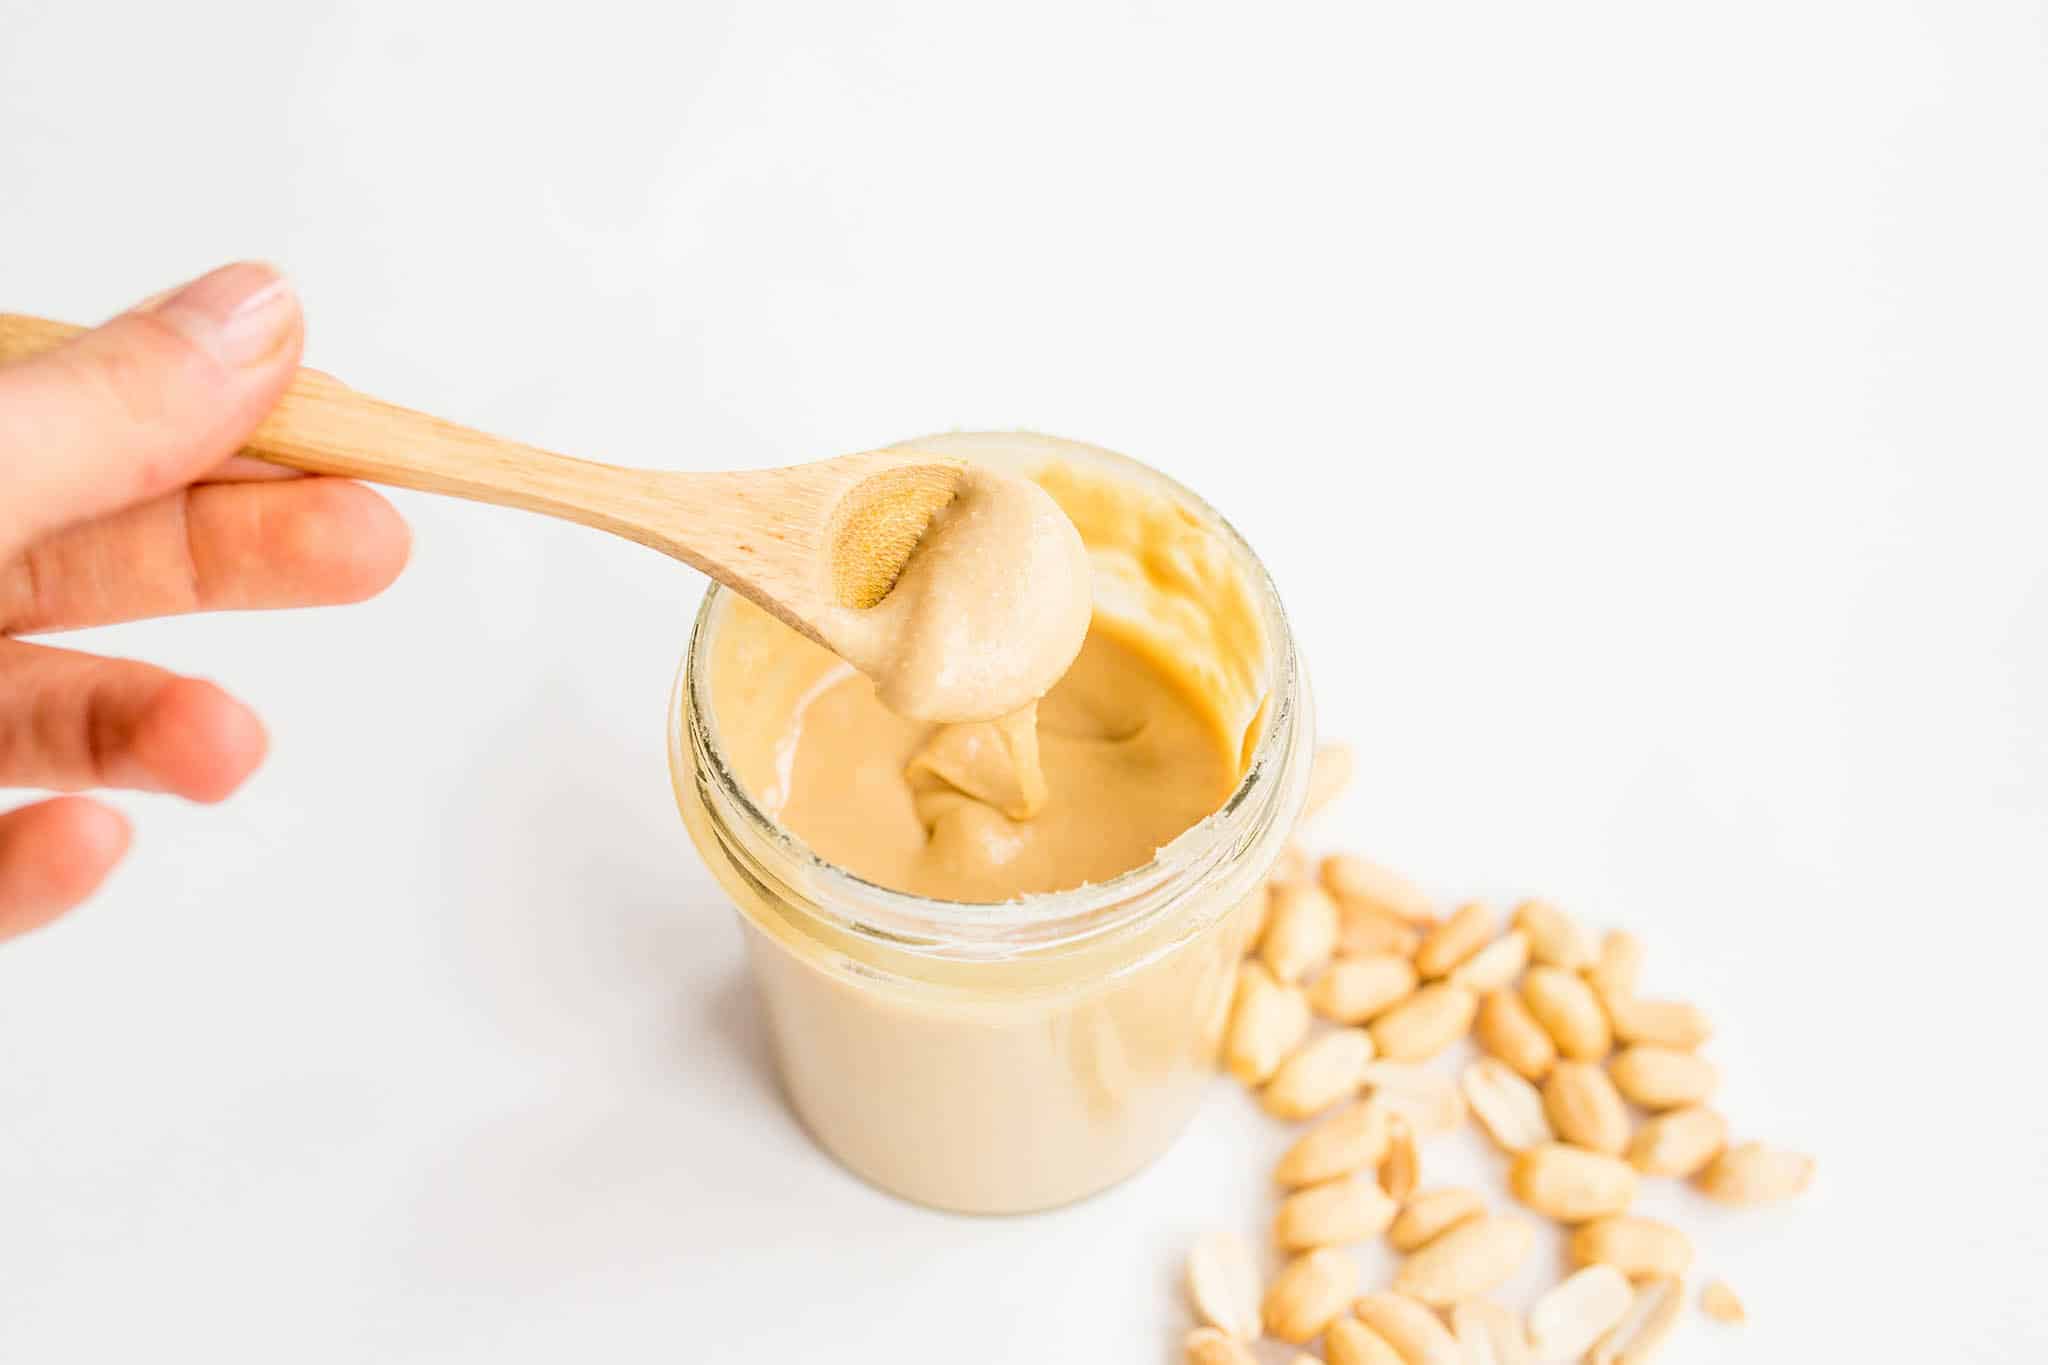 Homemade peanut butter in glass jar with hand and wooden spoon Photo: Marco Verch Professional Photographer / Flickr